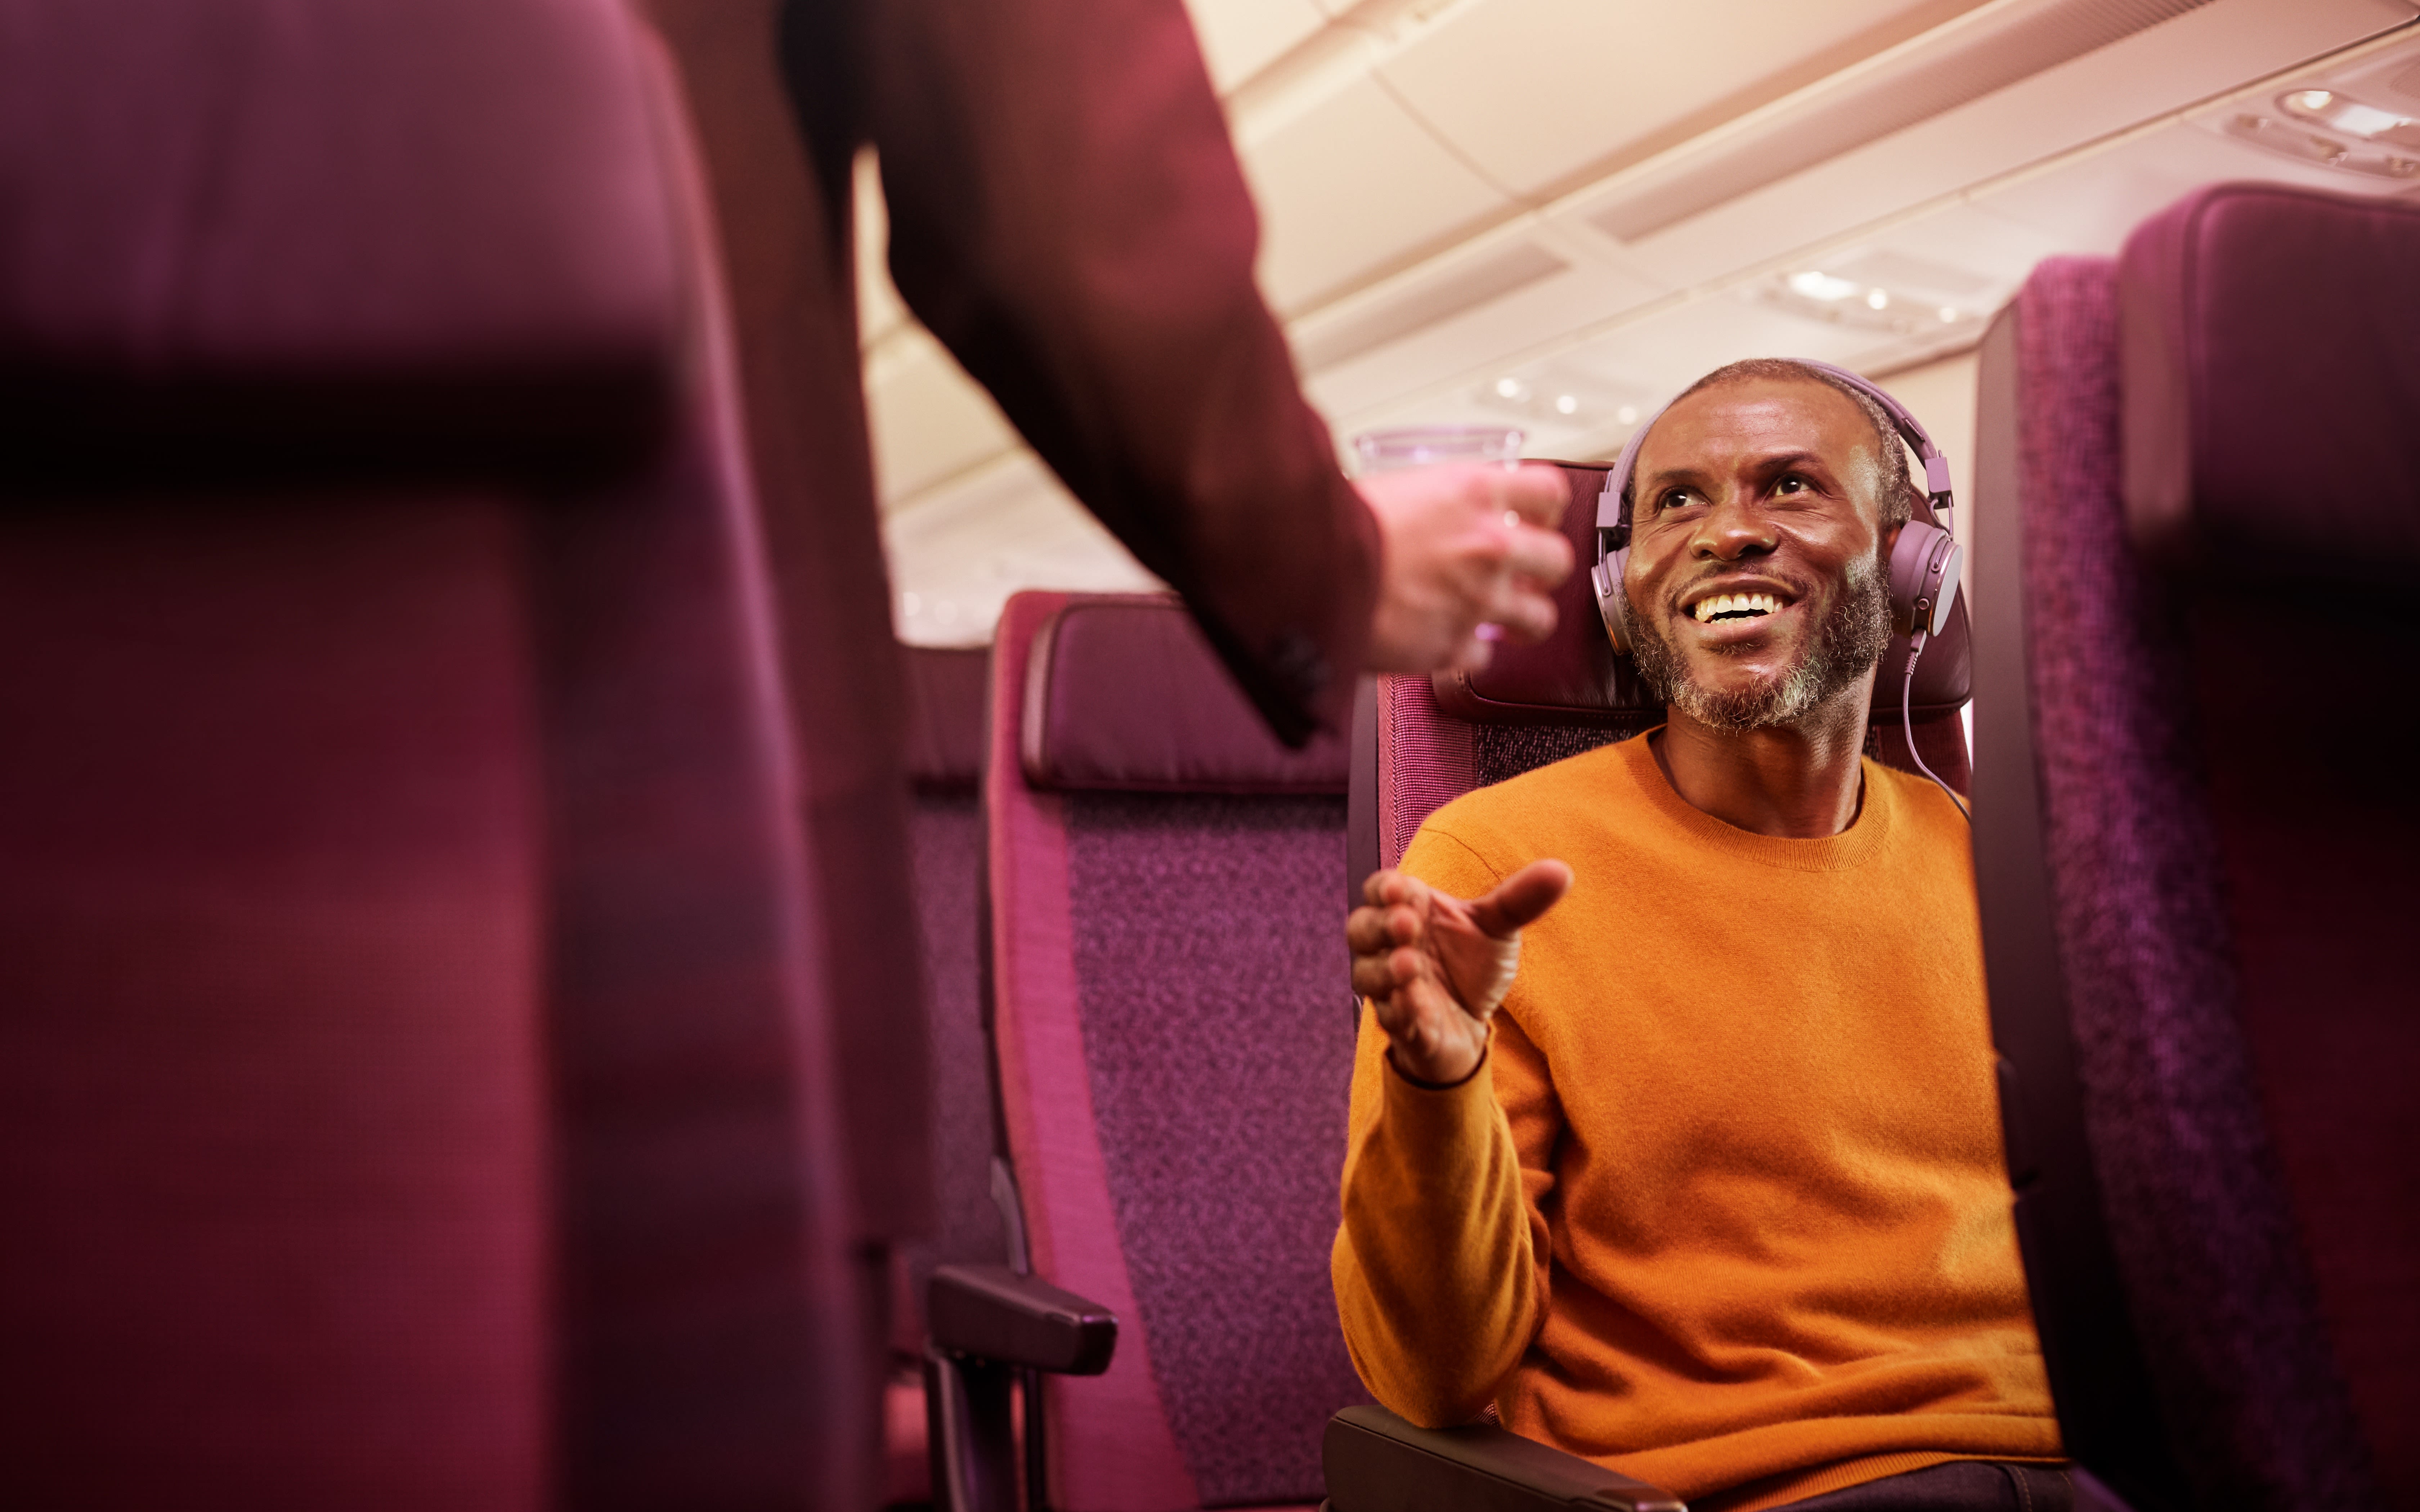 Image of a man smiling whilst sat on a Virgin Atlantic plane in an Economy seat.